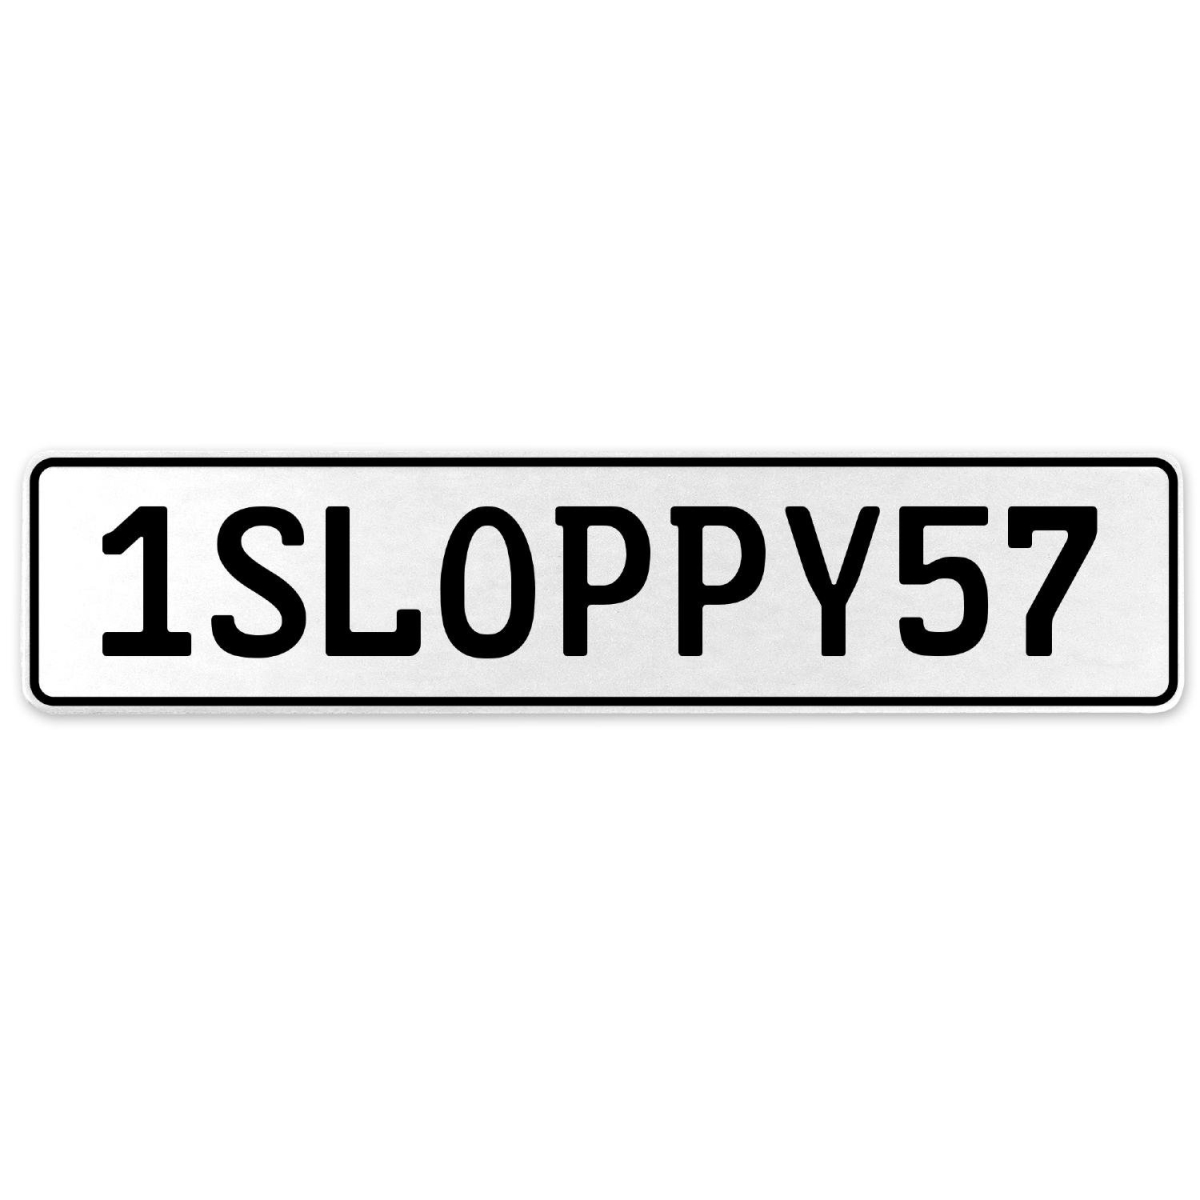 1sloppy57 - White Aluminum Street Sign Mancave Euro Plate Name Door Sign Wall